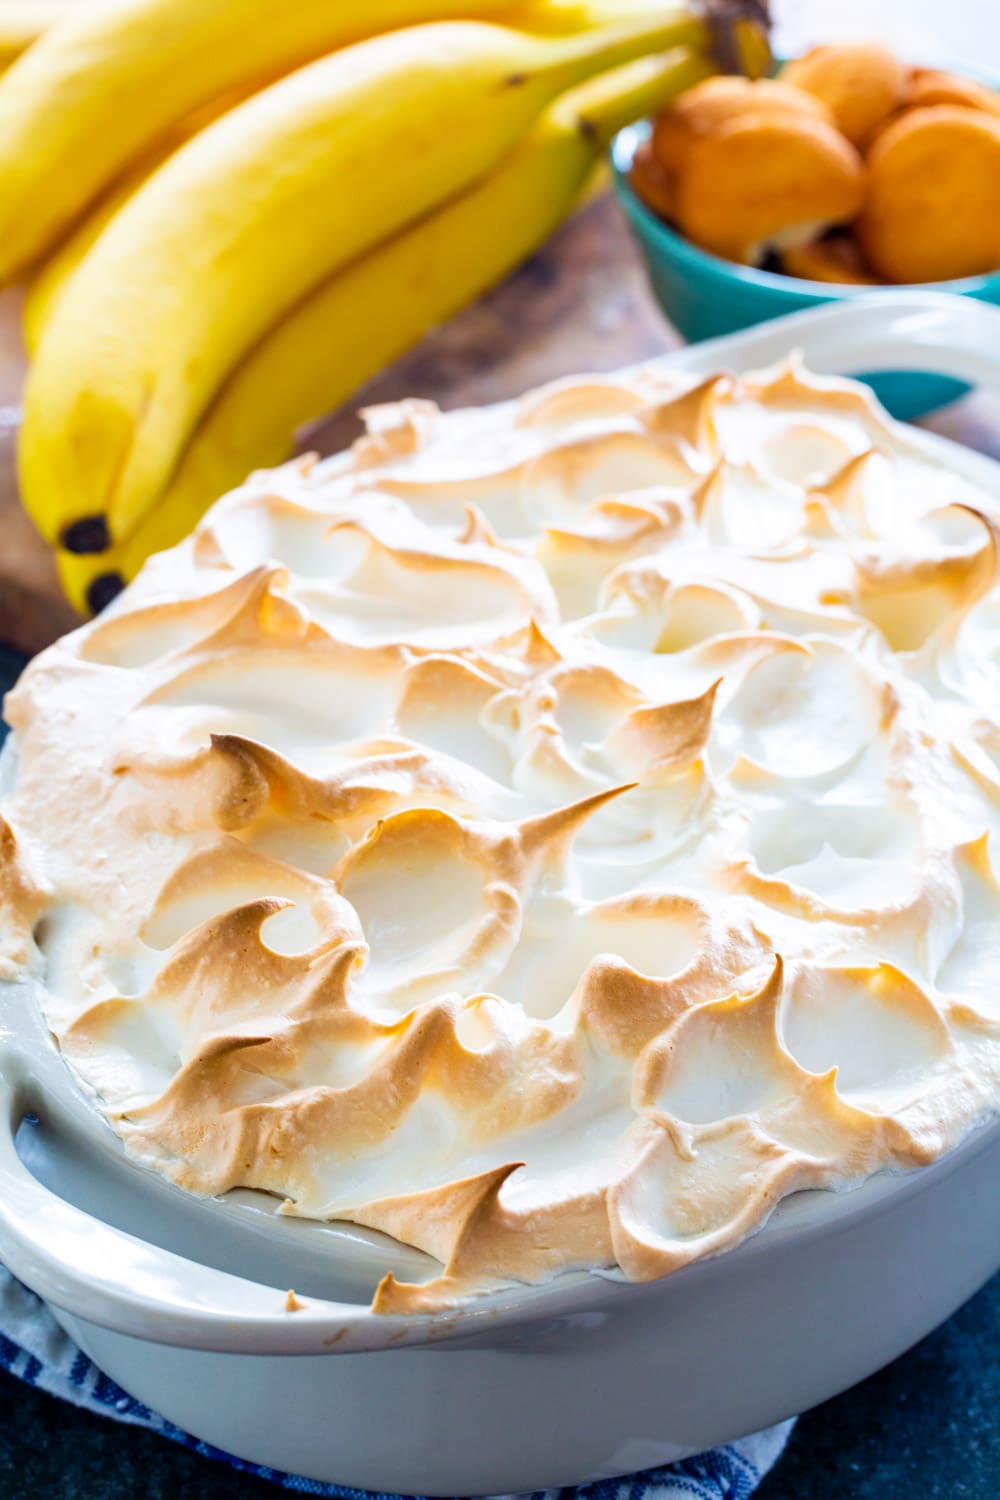 Banana Pudding topped with Meringue in an oval baking dish.